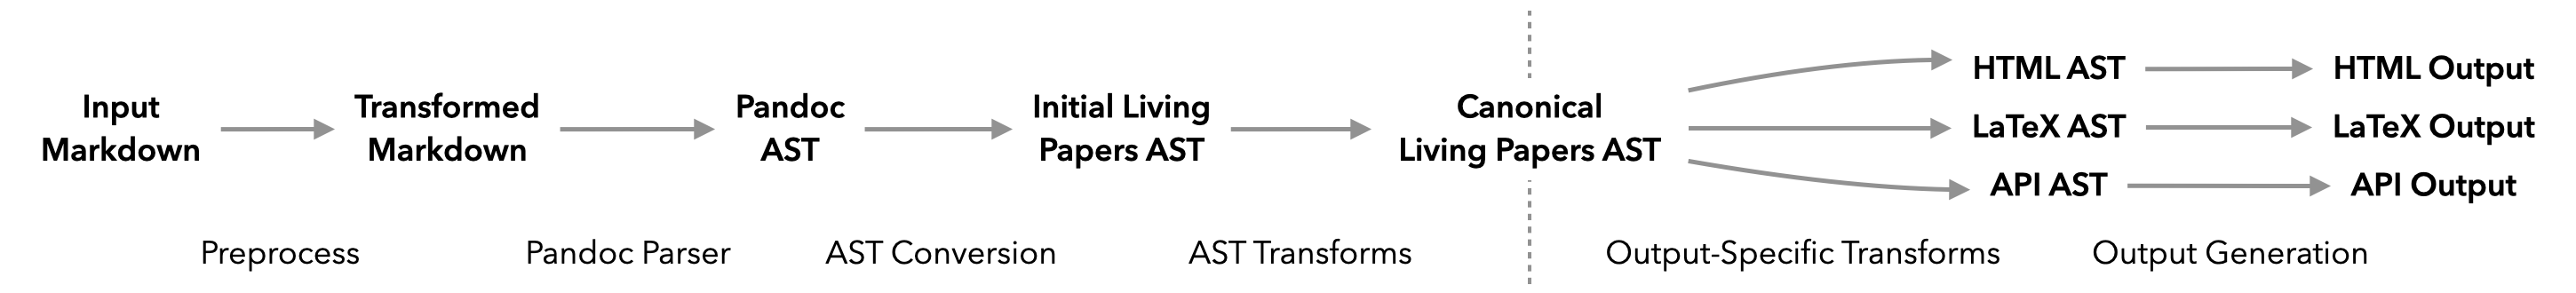 A detailed pipeline diagram showing all computational steps. The input markdown is preprocessed into transformed markdown, parsed into a Pandoc AST, converted into an initial Living Papers AST, transformed into a canonical Living Papers AST, and then transformed into output-specific ASTs and outputs.